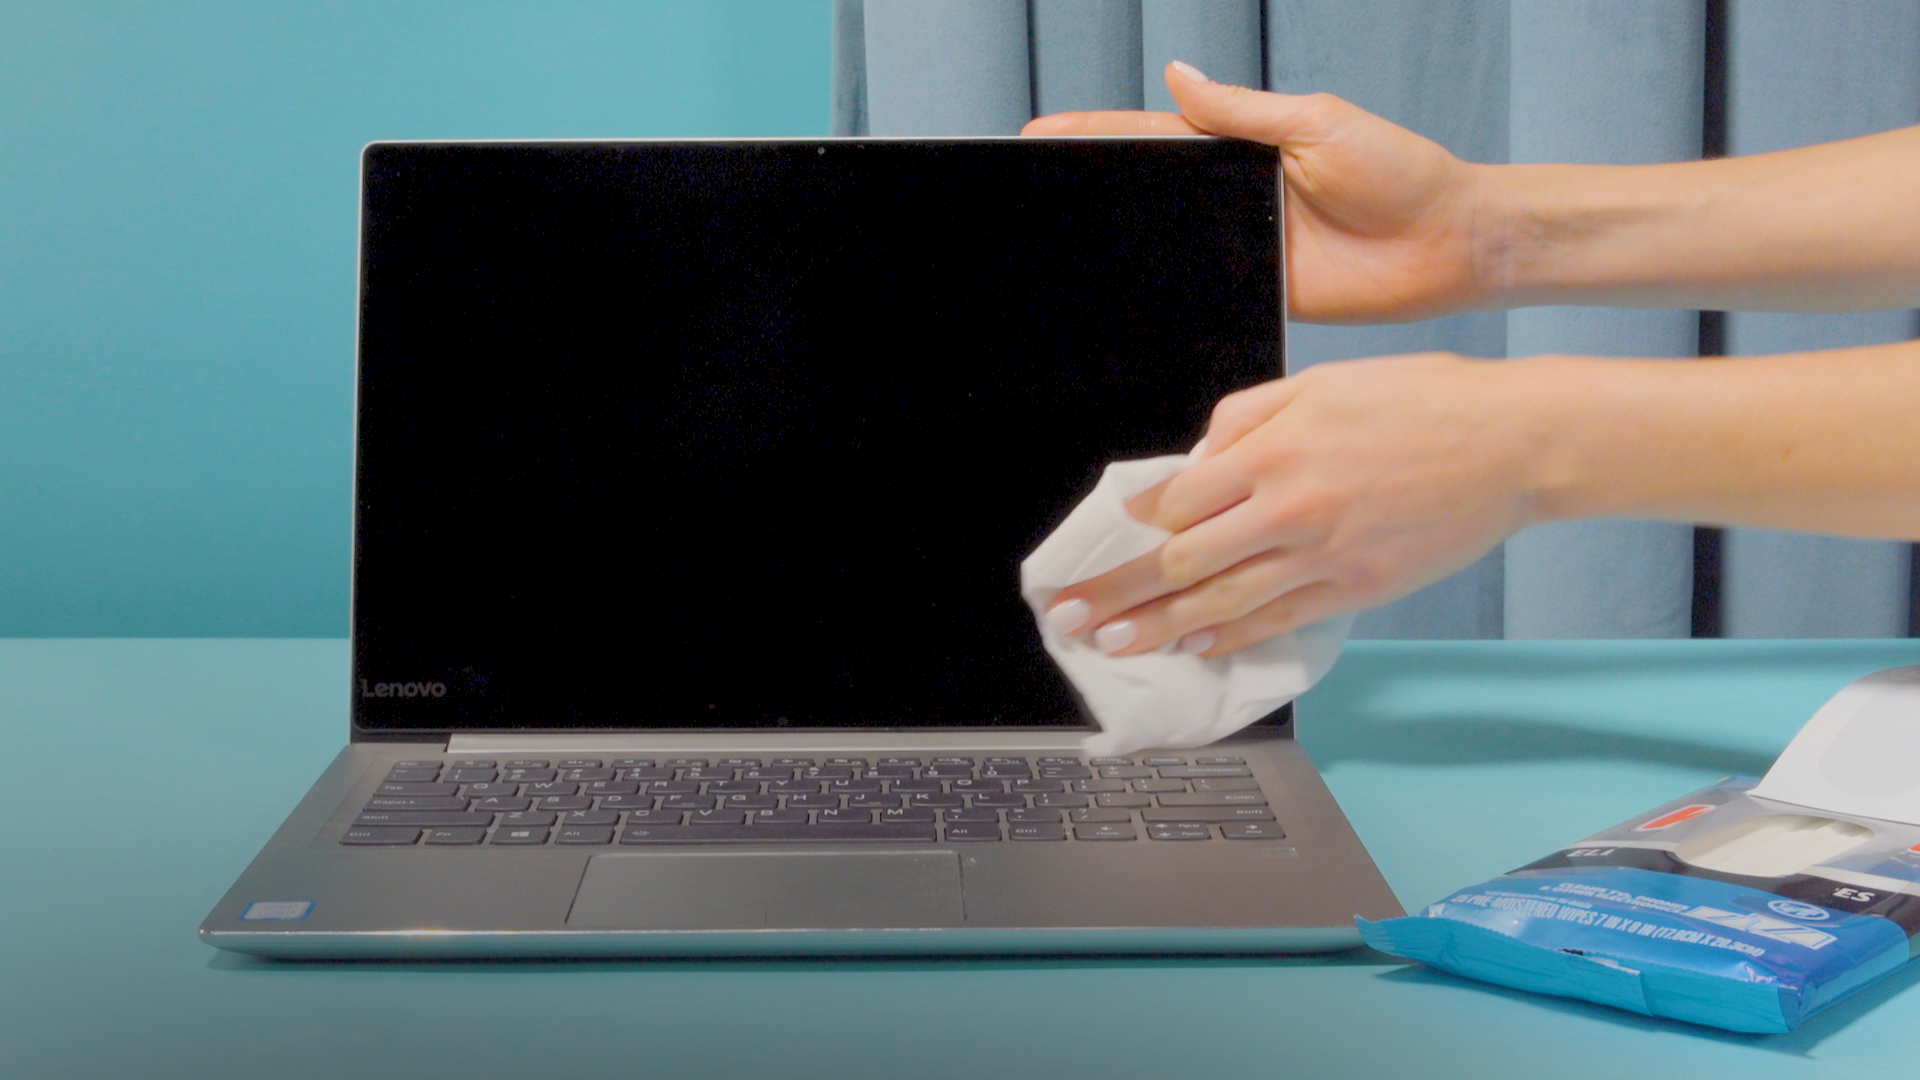 Regularly clean your laptop screen to maintain its clarity and performance.
Use a soft, lint-free cloth to gently wipe the screen.